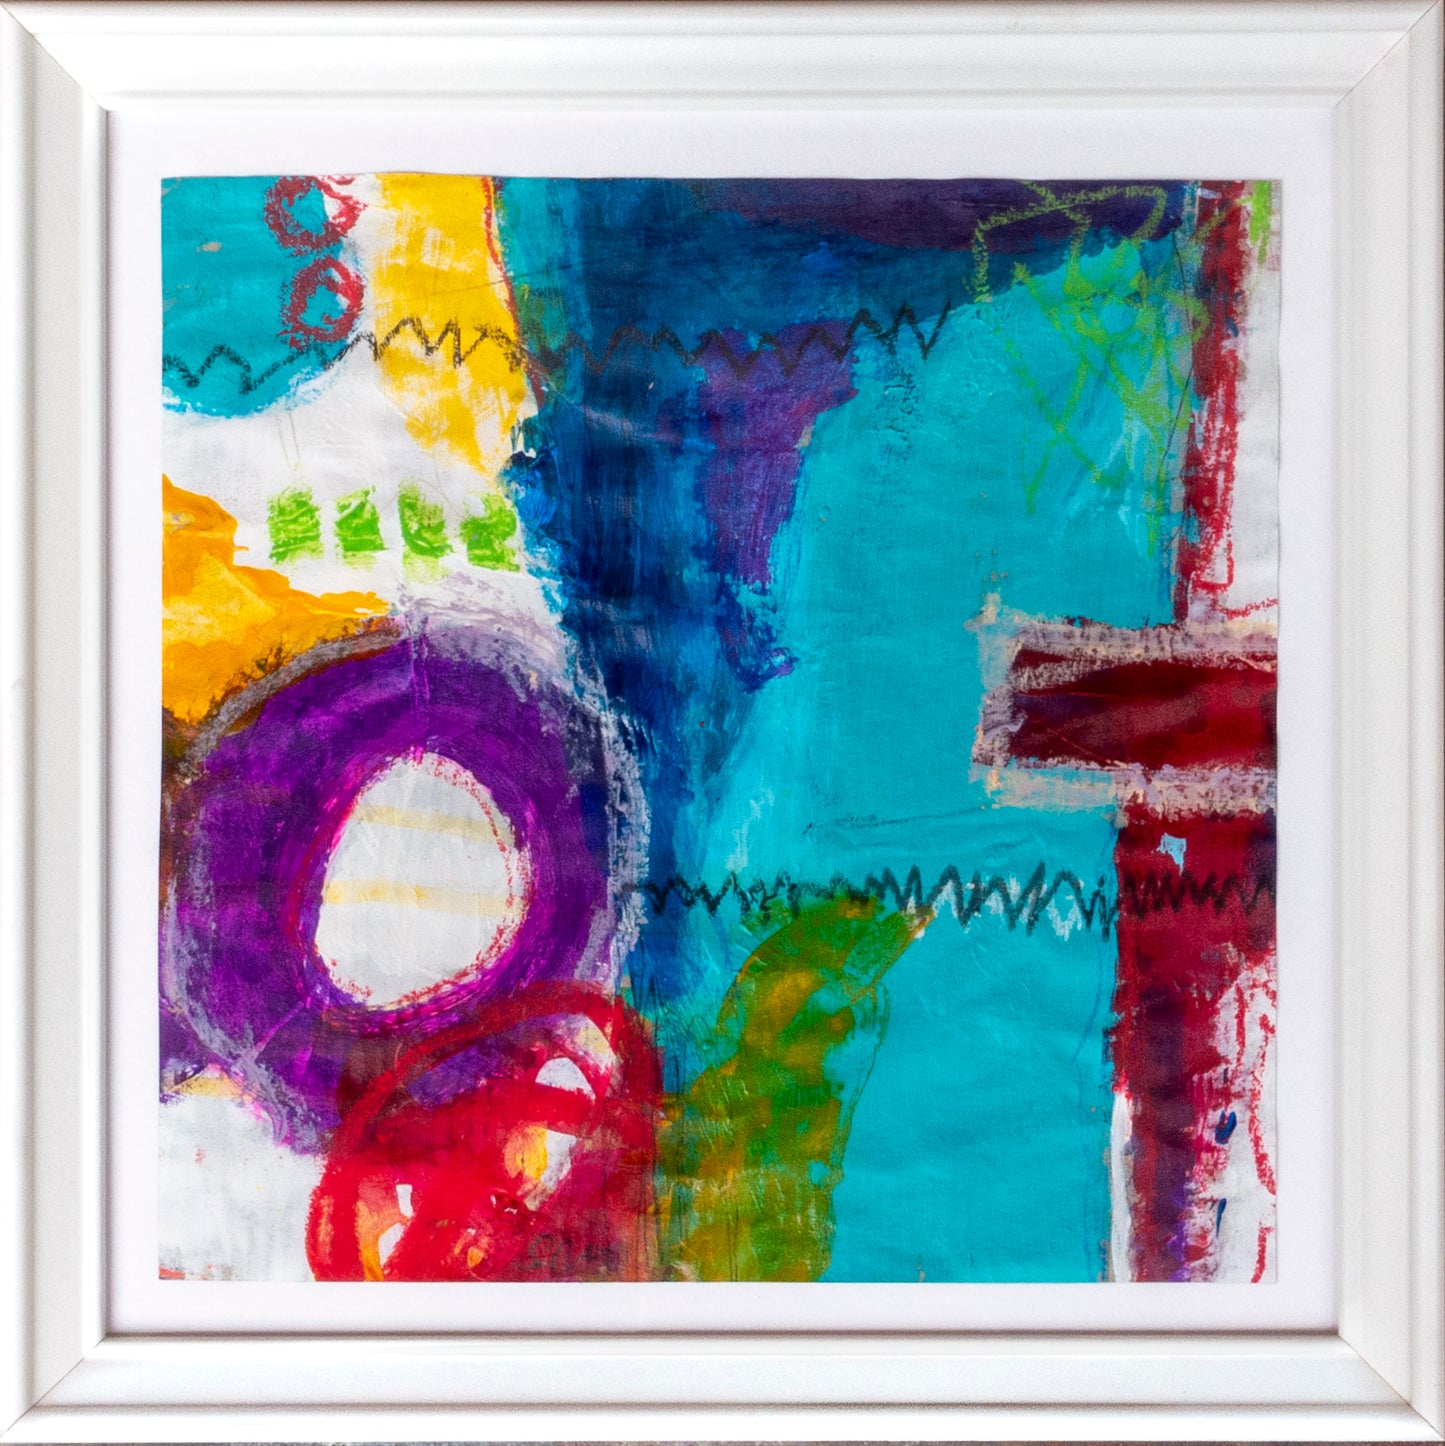 Colorful acrylic abstract painting on paper titled 'Part of the Whole #12' by artist Steffi Möllers; measures app 7.5"x7.5"; w/frame measures 10"x10"